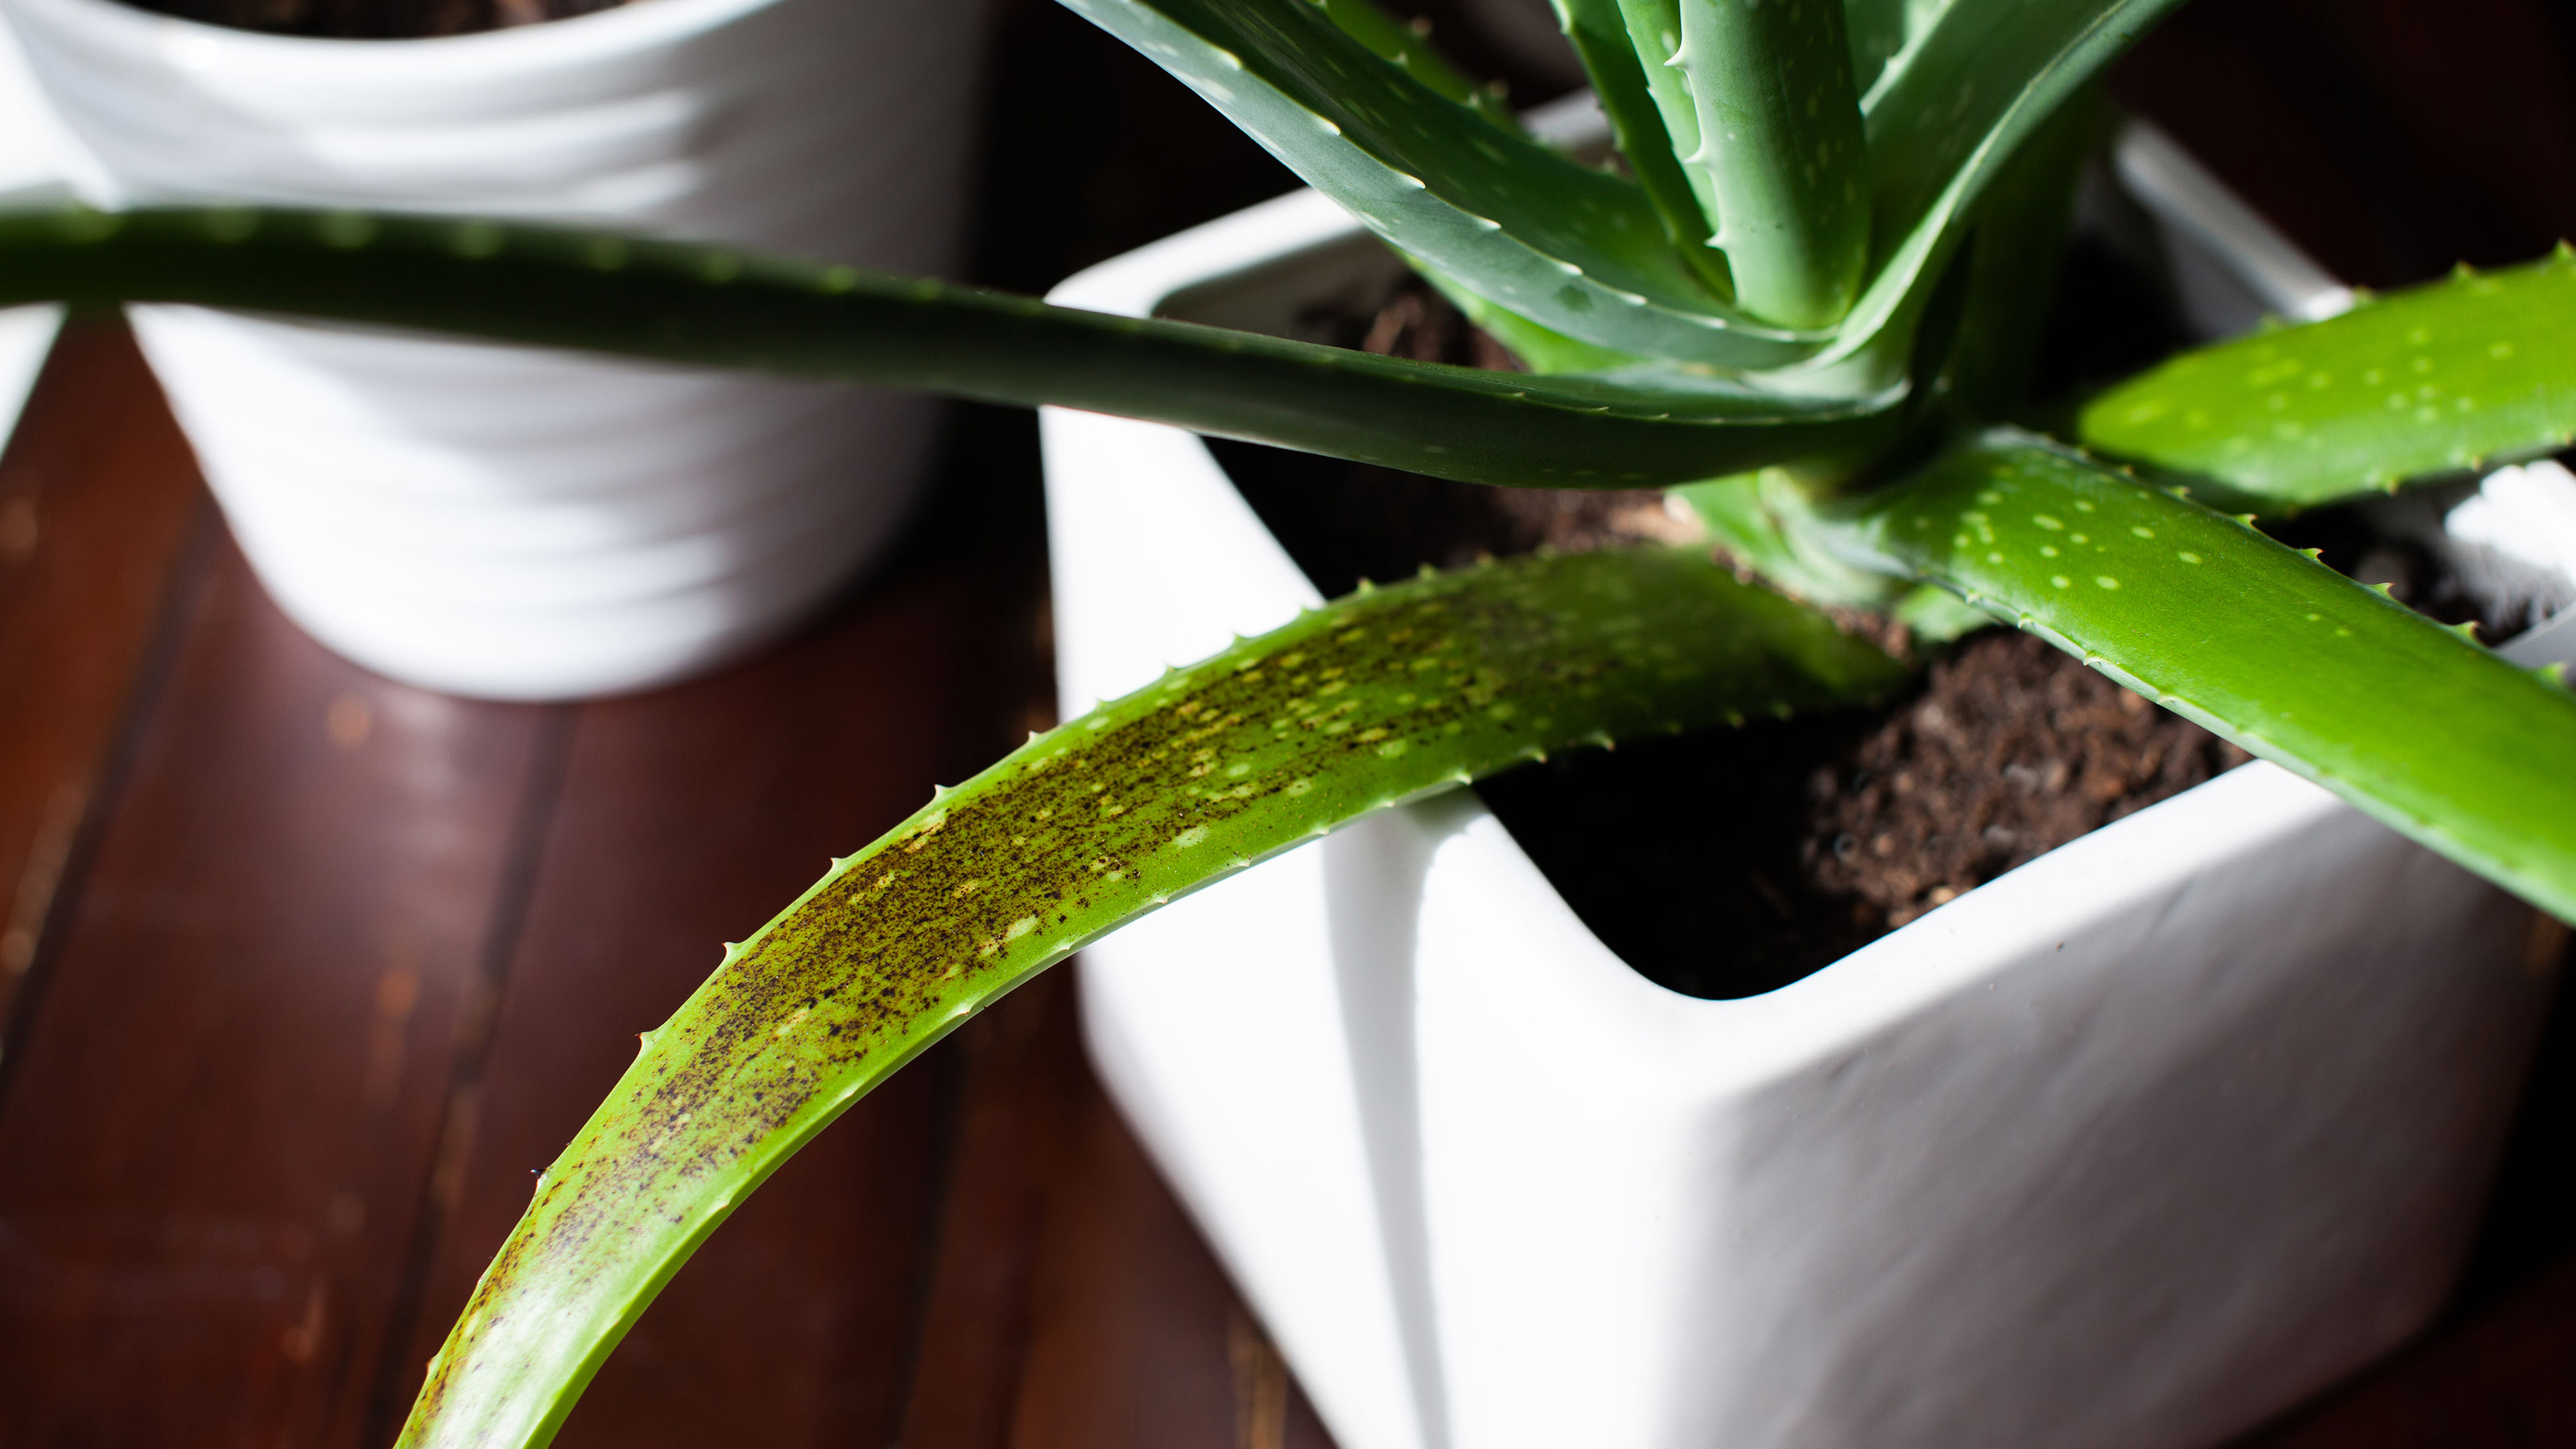 What Does an Overwatered Aloe Plant Look Like?